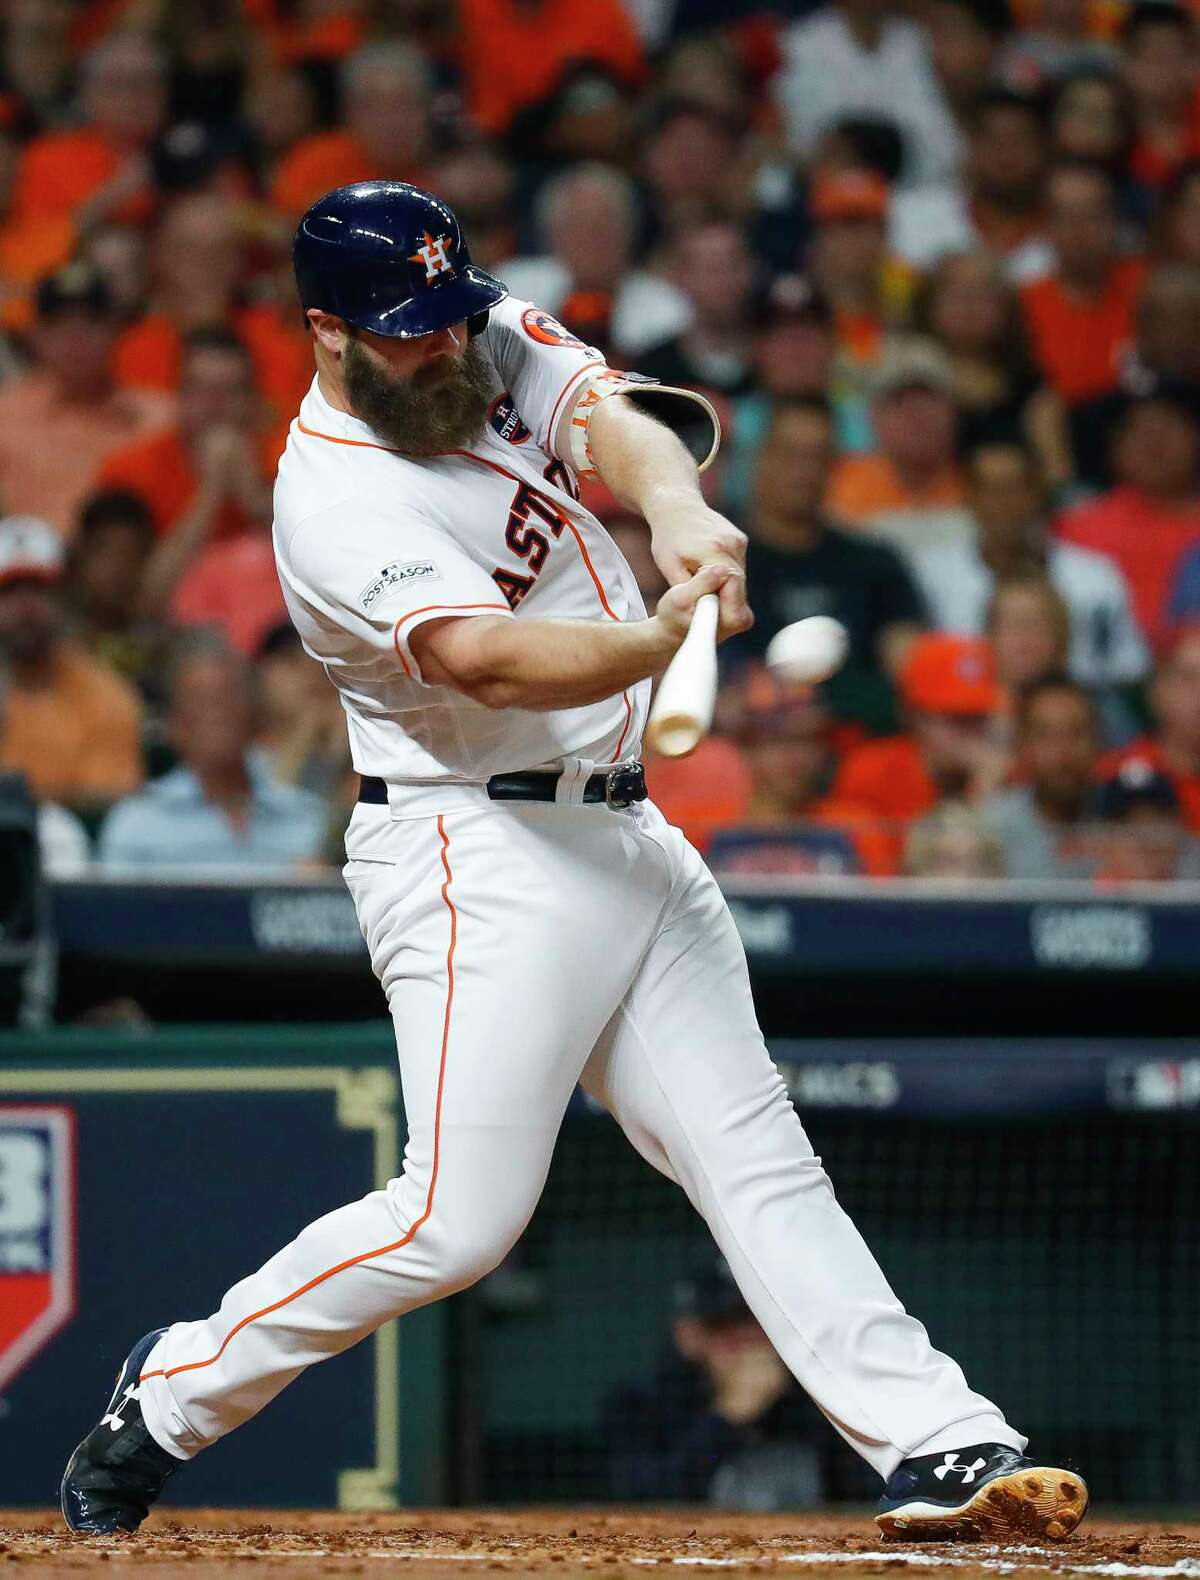 Though Evan Gattis hit just 12 homers in 325 plate appearances last season, the Astros plan to have him serve as their primary designated hitter in 2018 instead of as the No. 2 catcher.